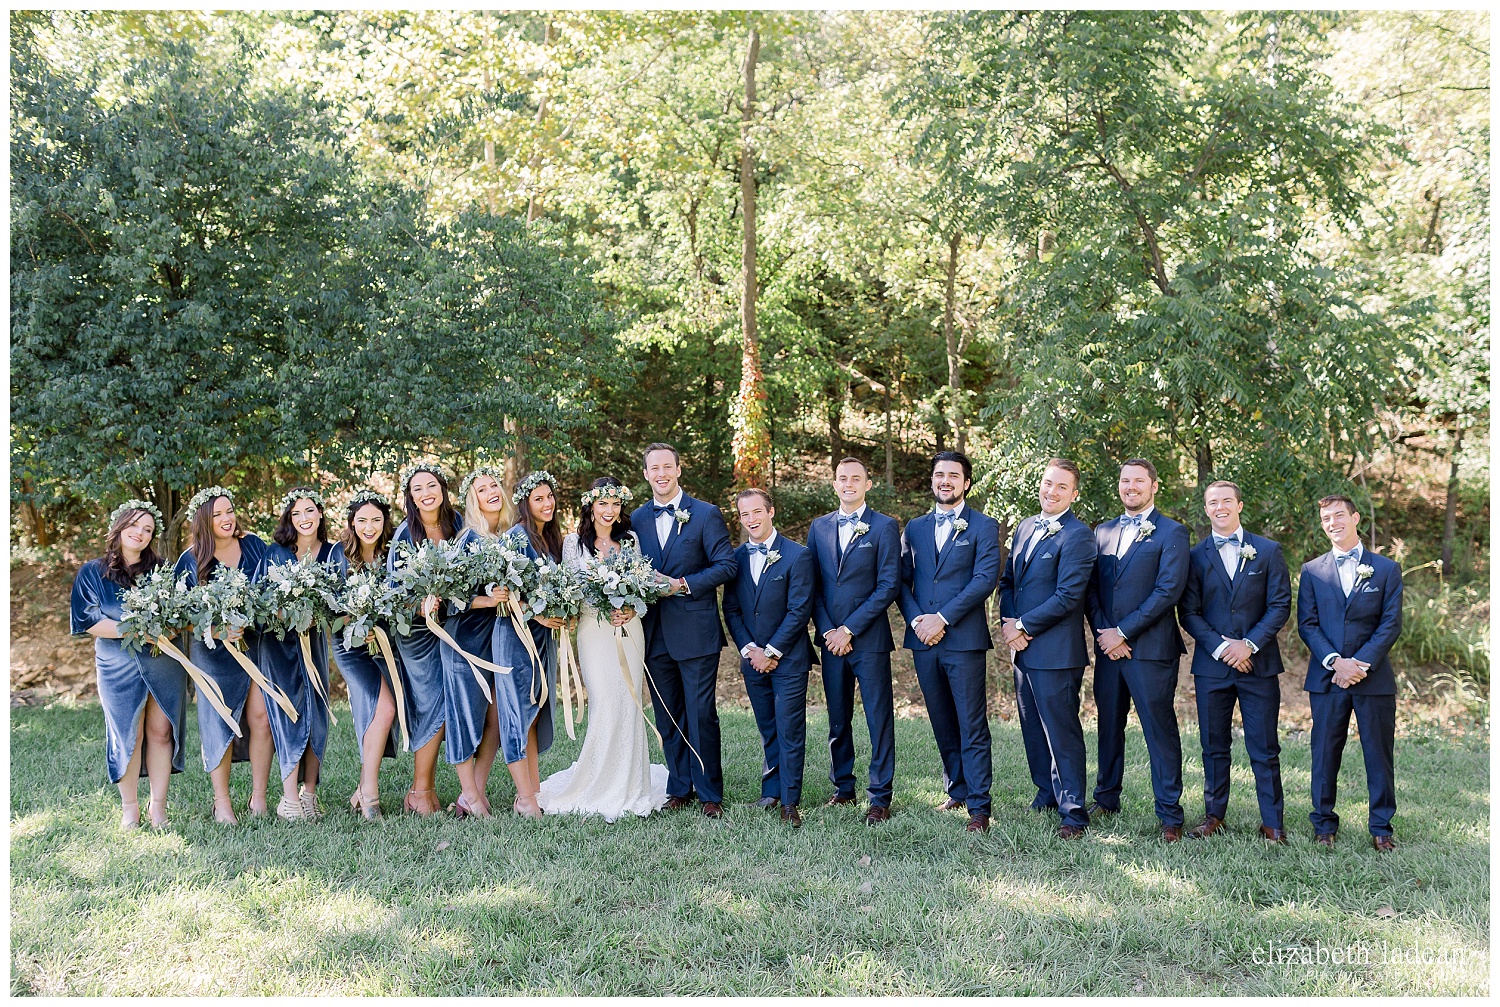 Willow-Creek-Blush-and-Blues-Outdoor-Wedding-Photography-S+Z2018-elizabeth-ladean-photography-photo_0551.jpg